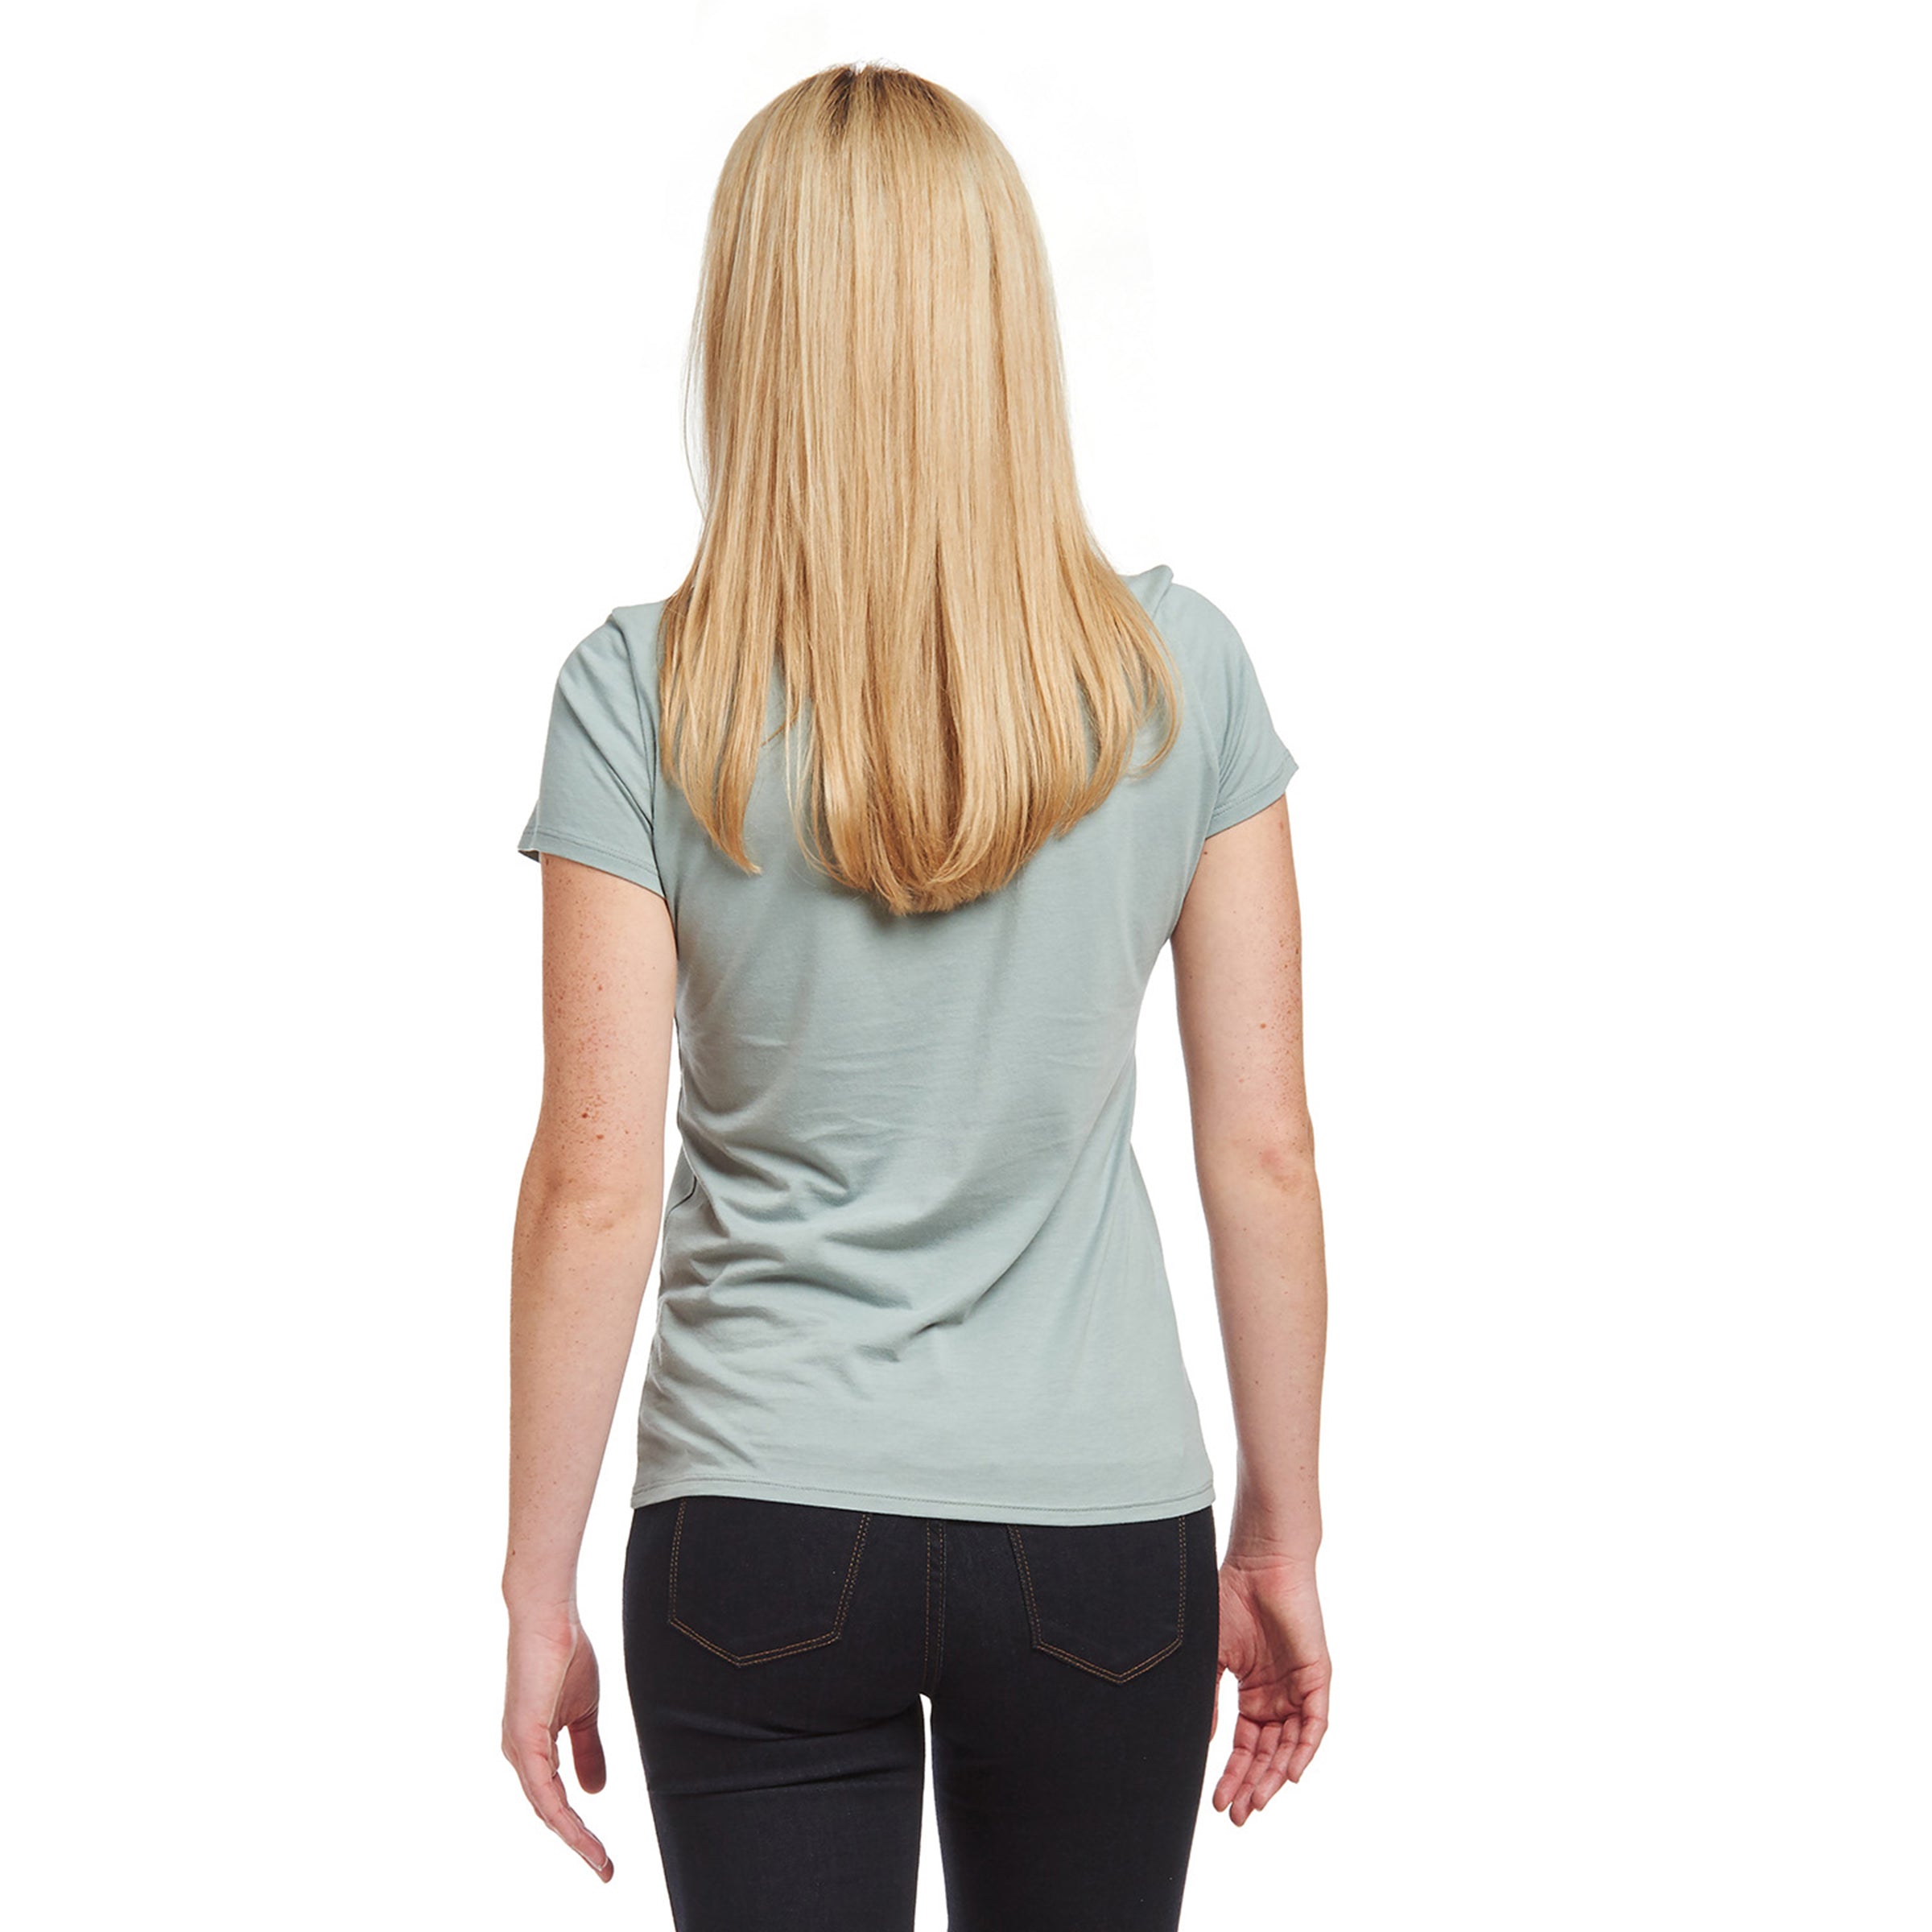 Women wearing Vigne Fitted V-Neck Marcy Tee